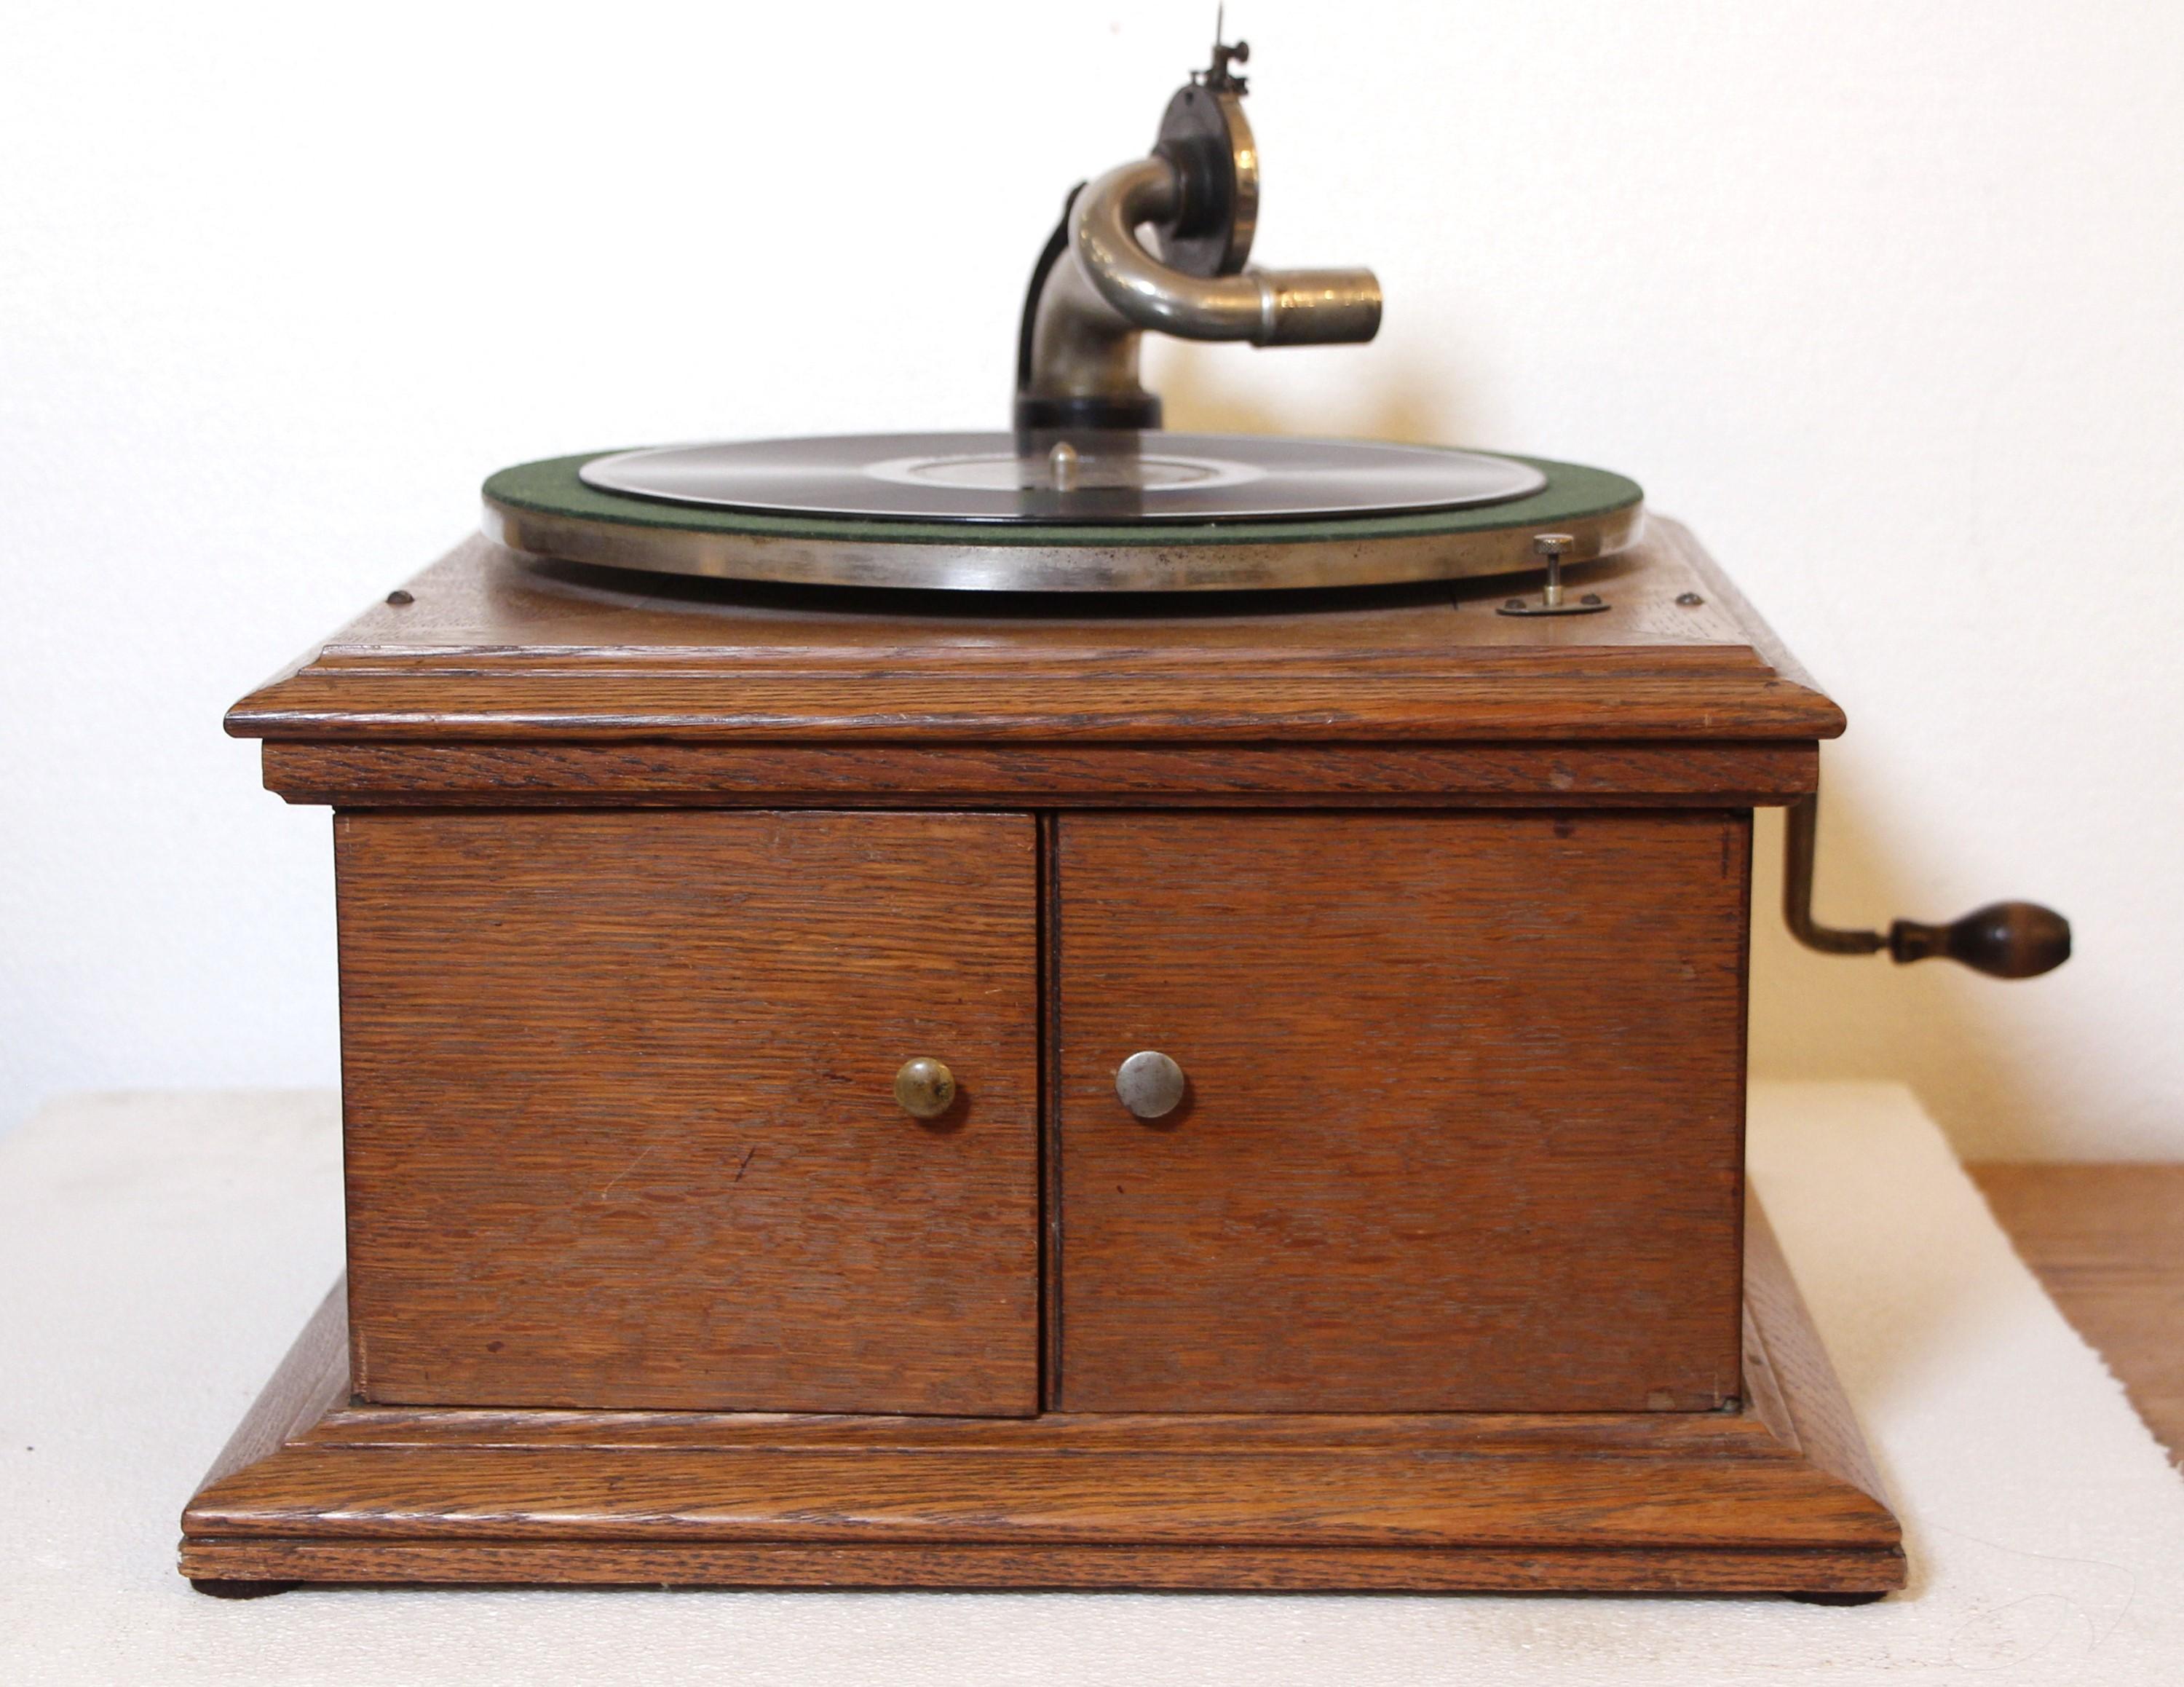 Original 1914 Model VV-VI Victor Talking Machine 78 speed record player housed in the original oak case with two doors that open to control the volume. Includes five 78 speed records. Restored to working condition. Uses a hand crank, no electricity